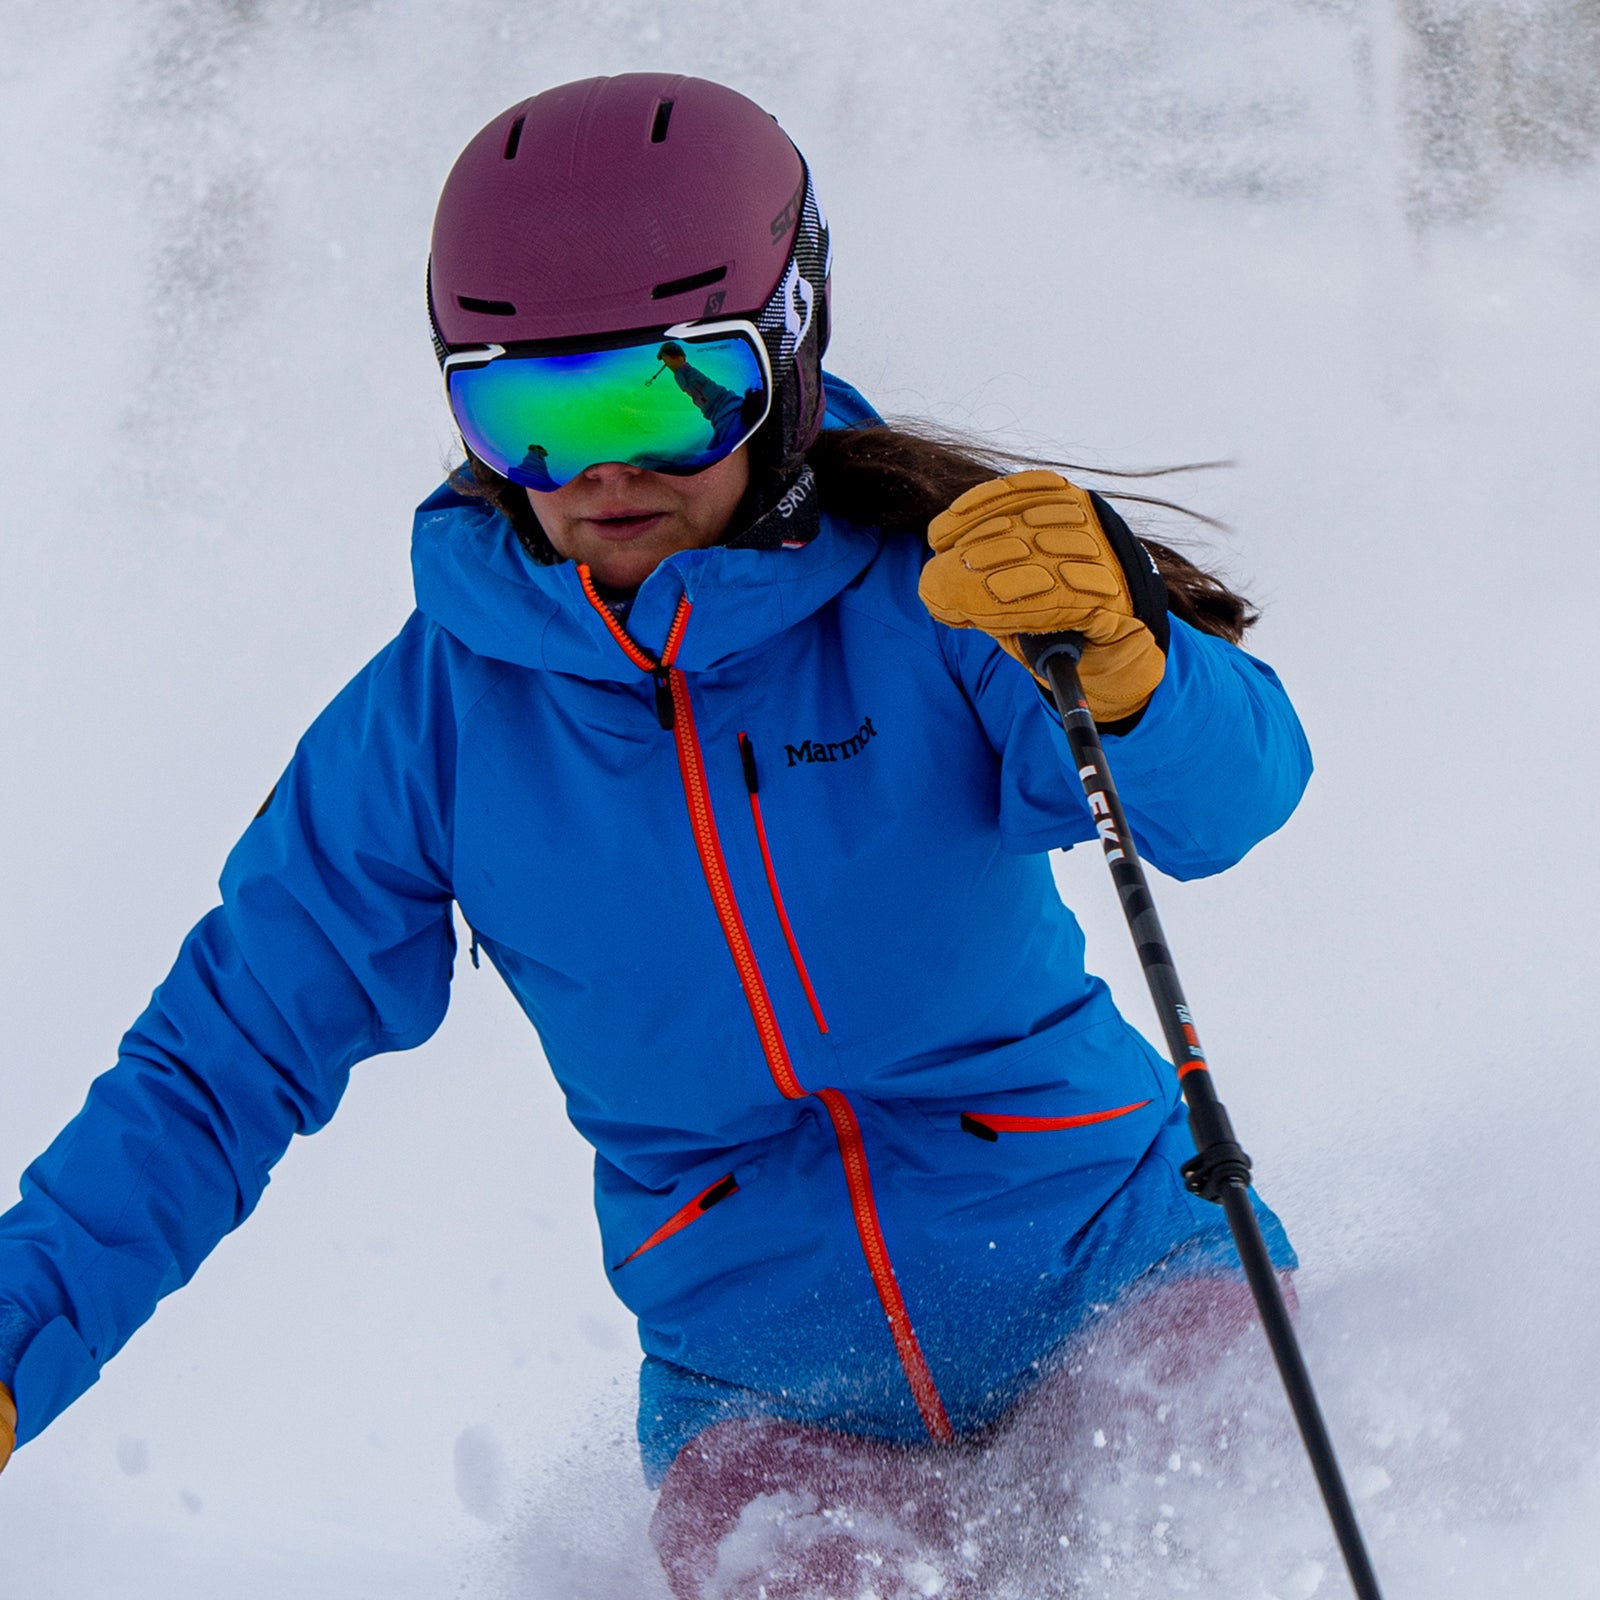 The Best Ski Brands and Gear for Men: Jackets, Helmets, Goggles